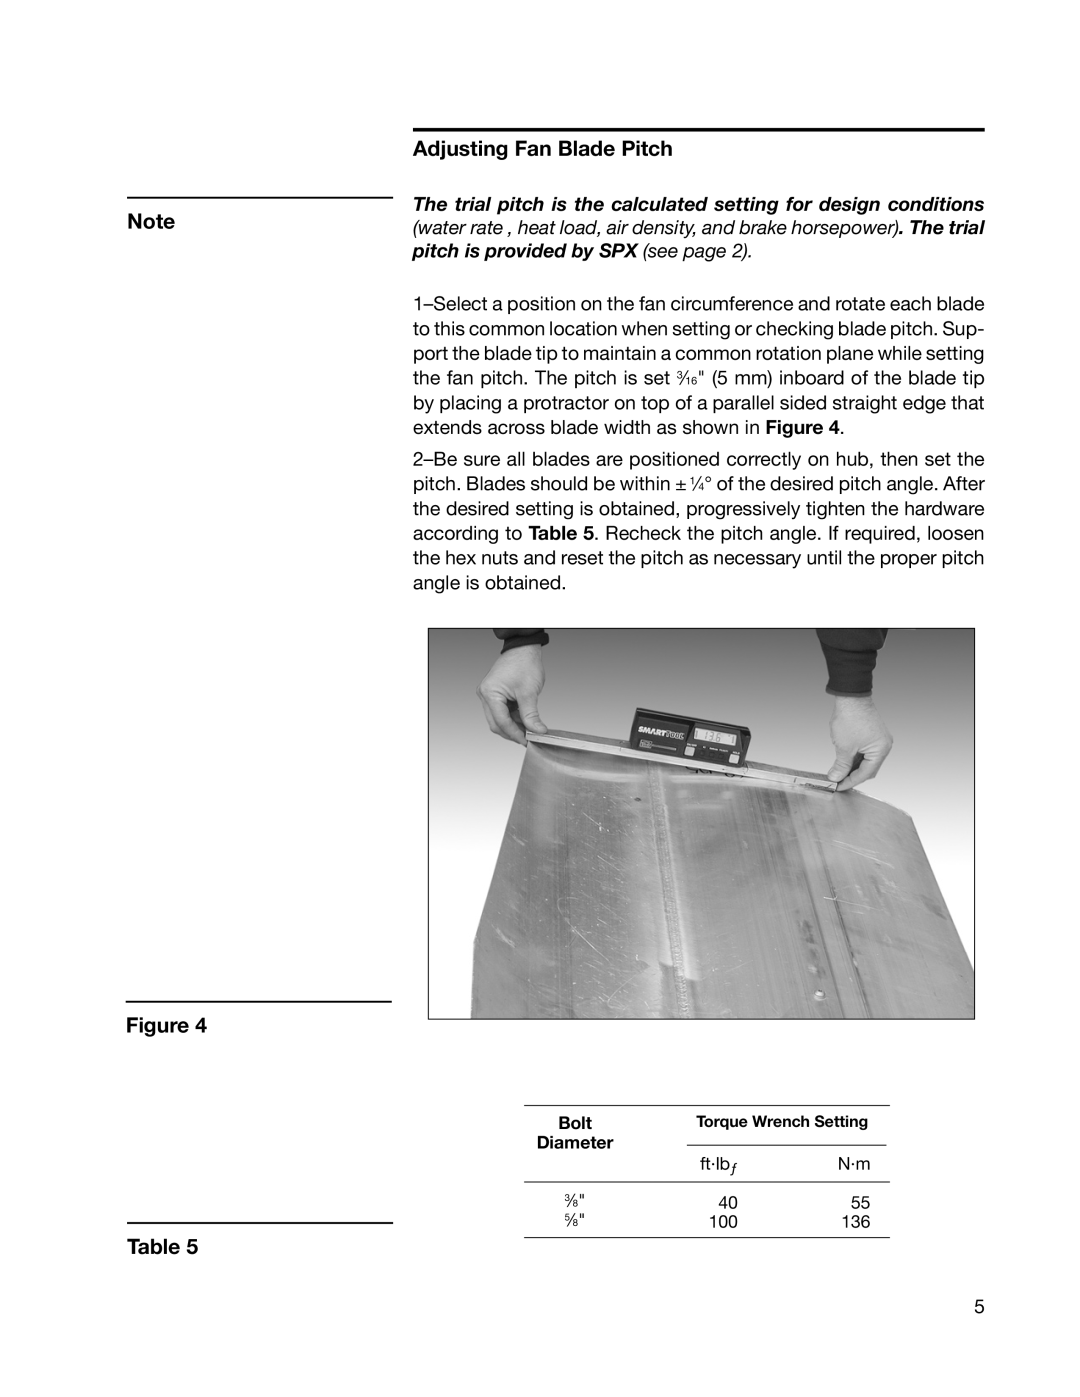 SPX Cooling Technologies 03-11A user manual Figure Table, Adjusting Fan Blade Pitch 